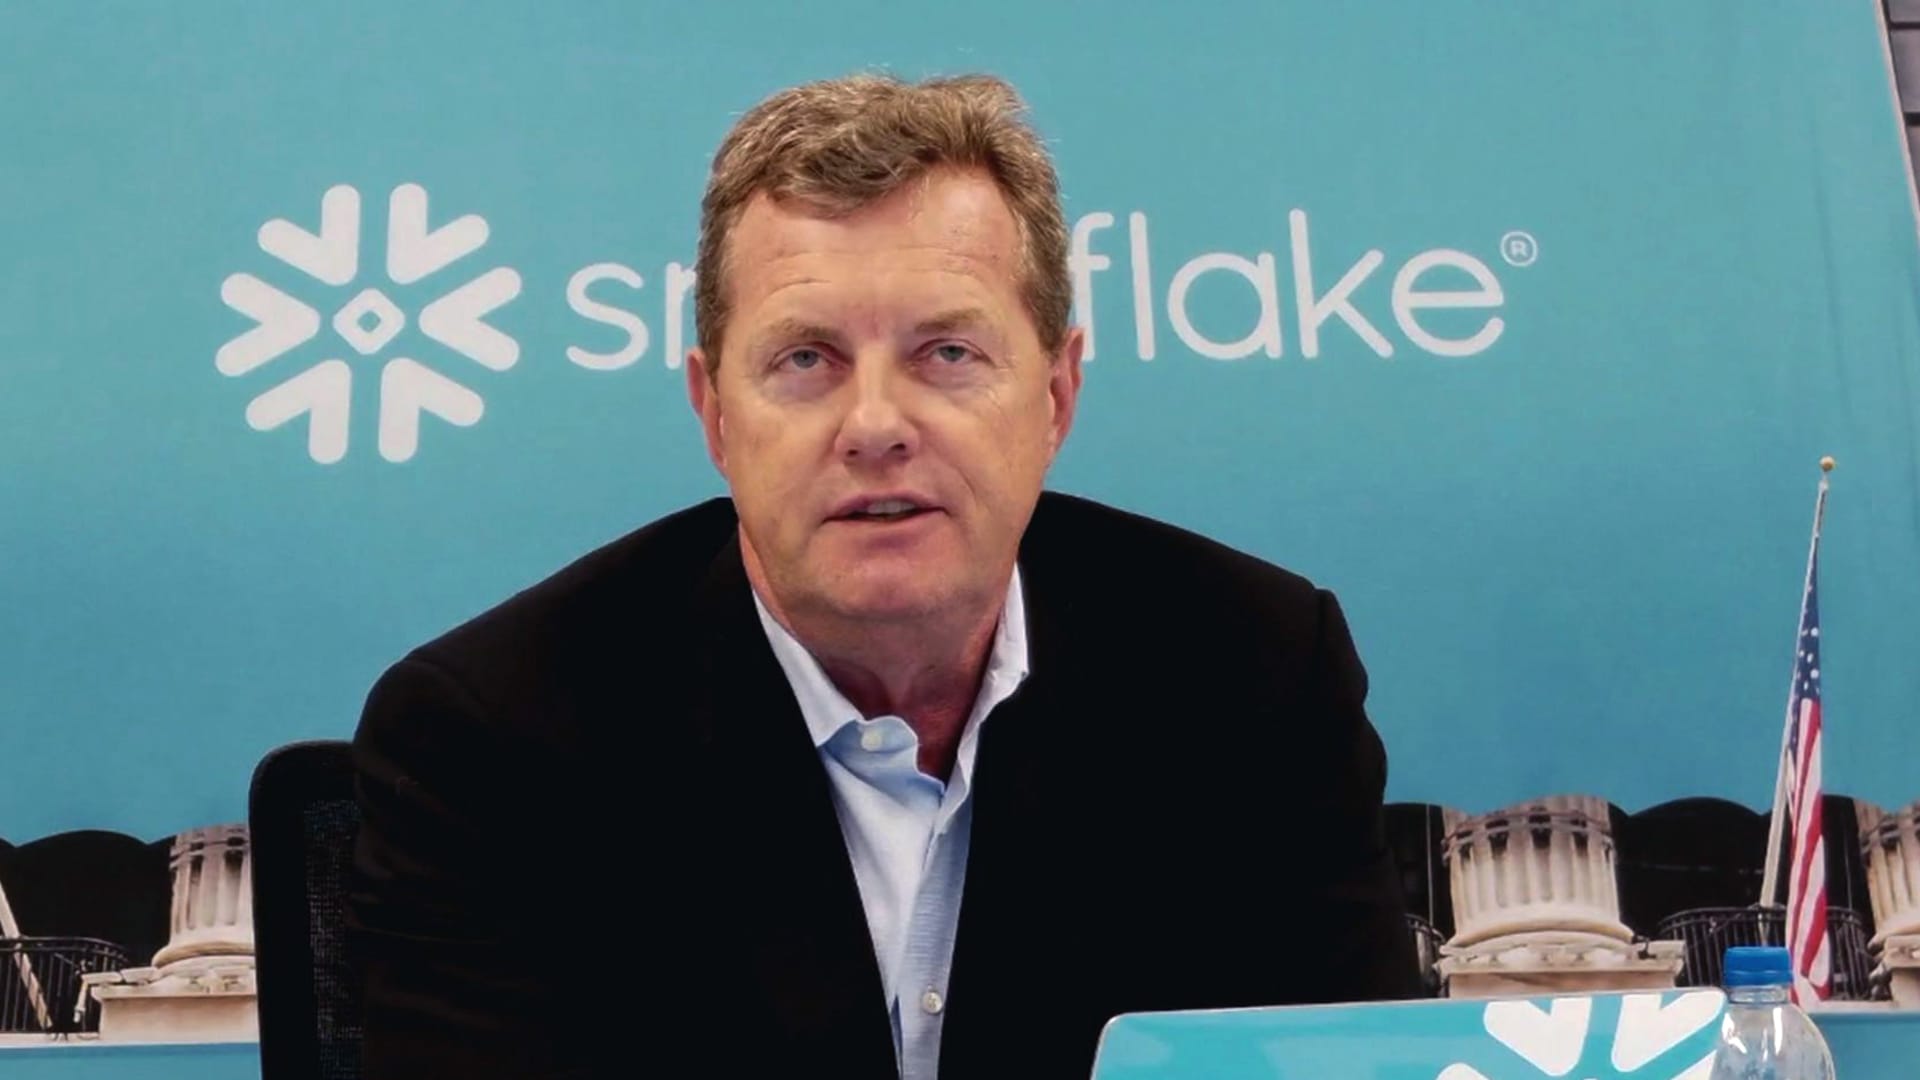 Frank Slootman, CEO of Snowflake Inc. on Sept. 16th, 2020.